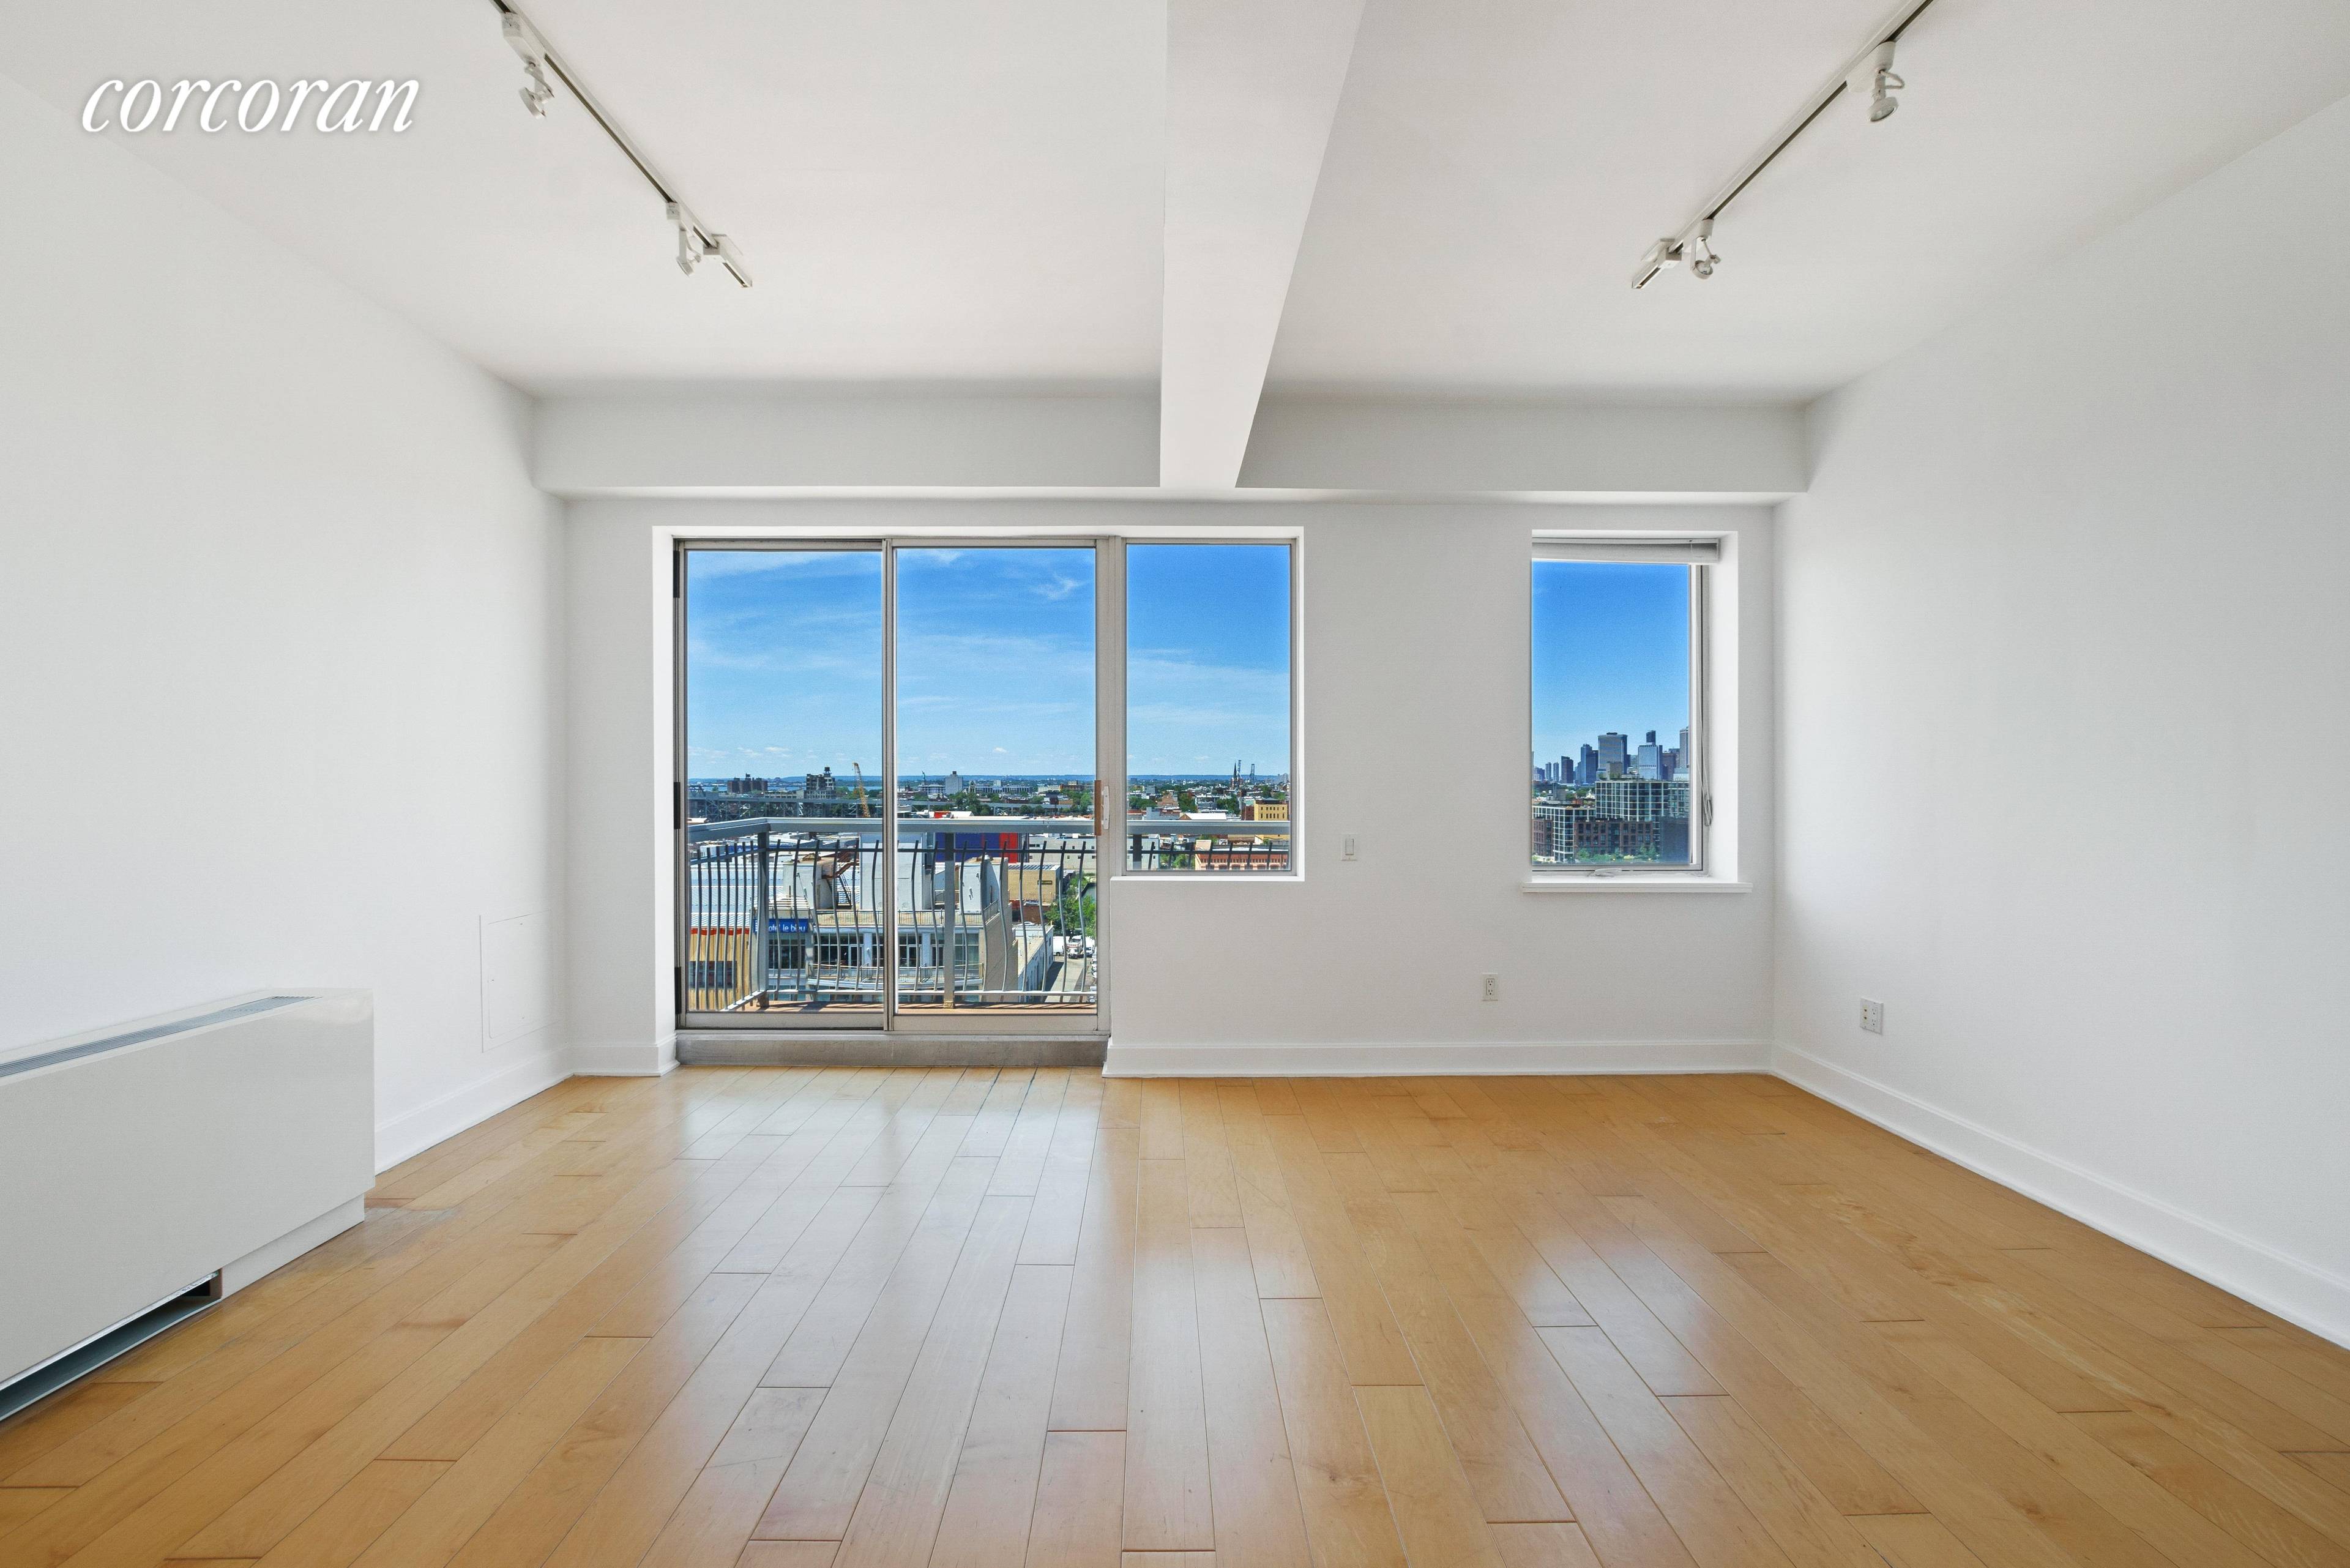 REQUEST A VIDEO TOUR ! Top Floor Stunner in one of Park Slope's finest full service building.